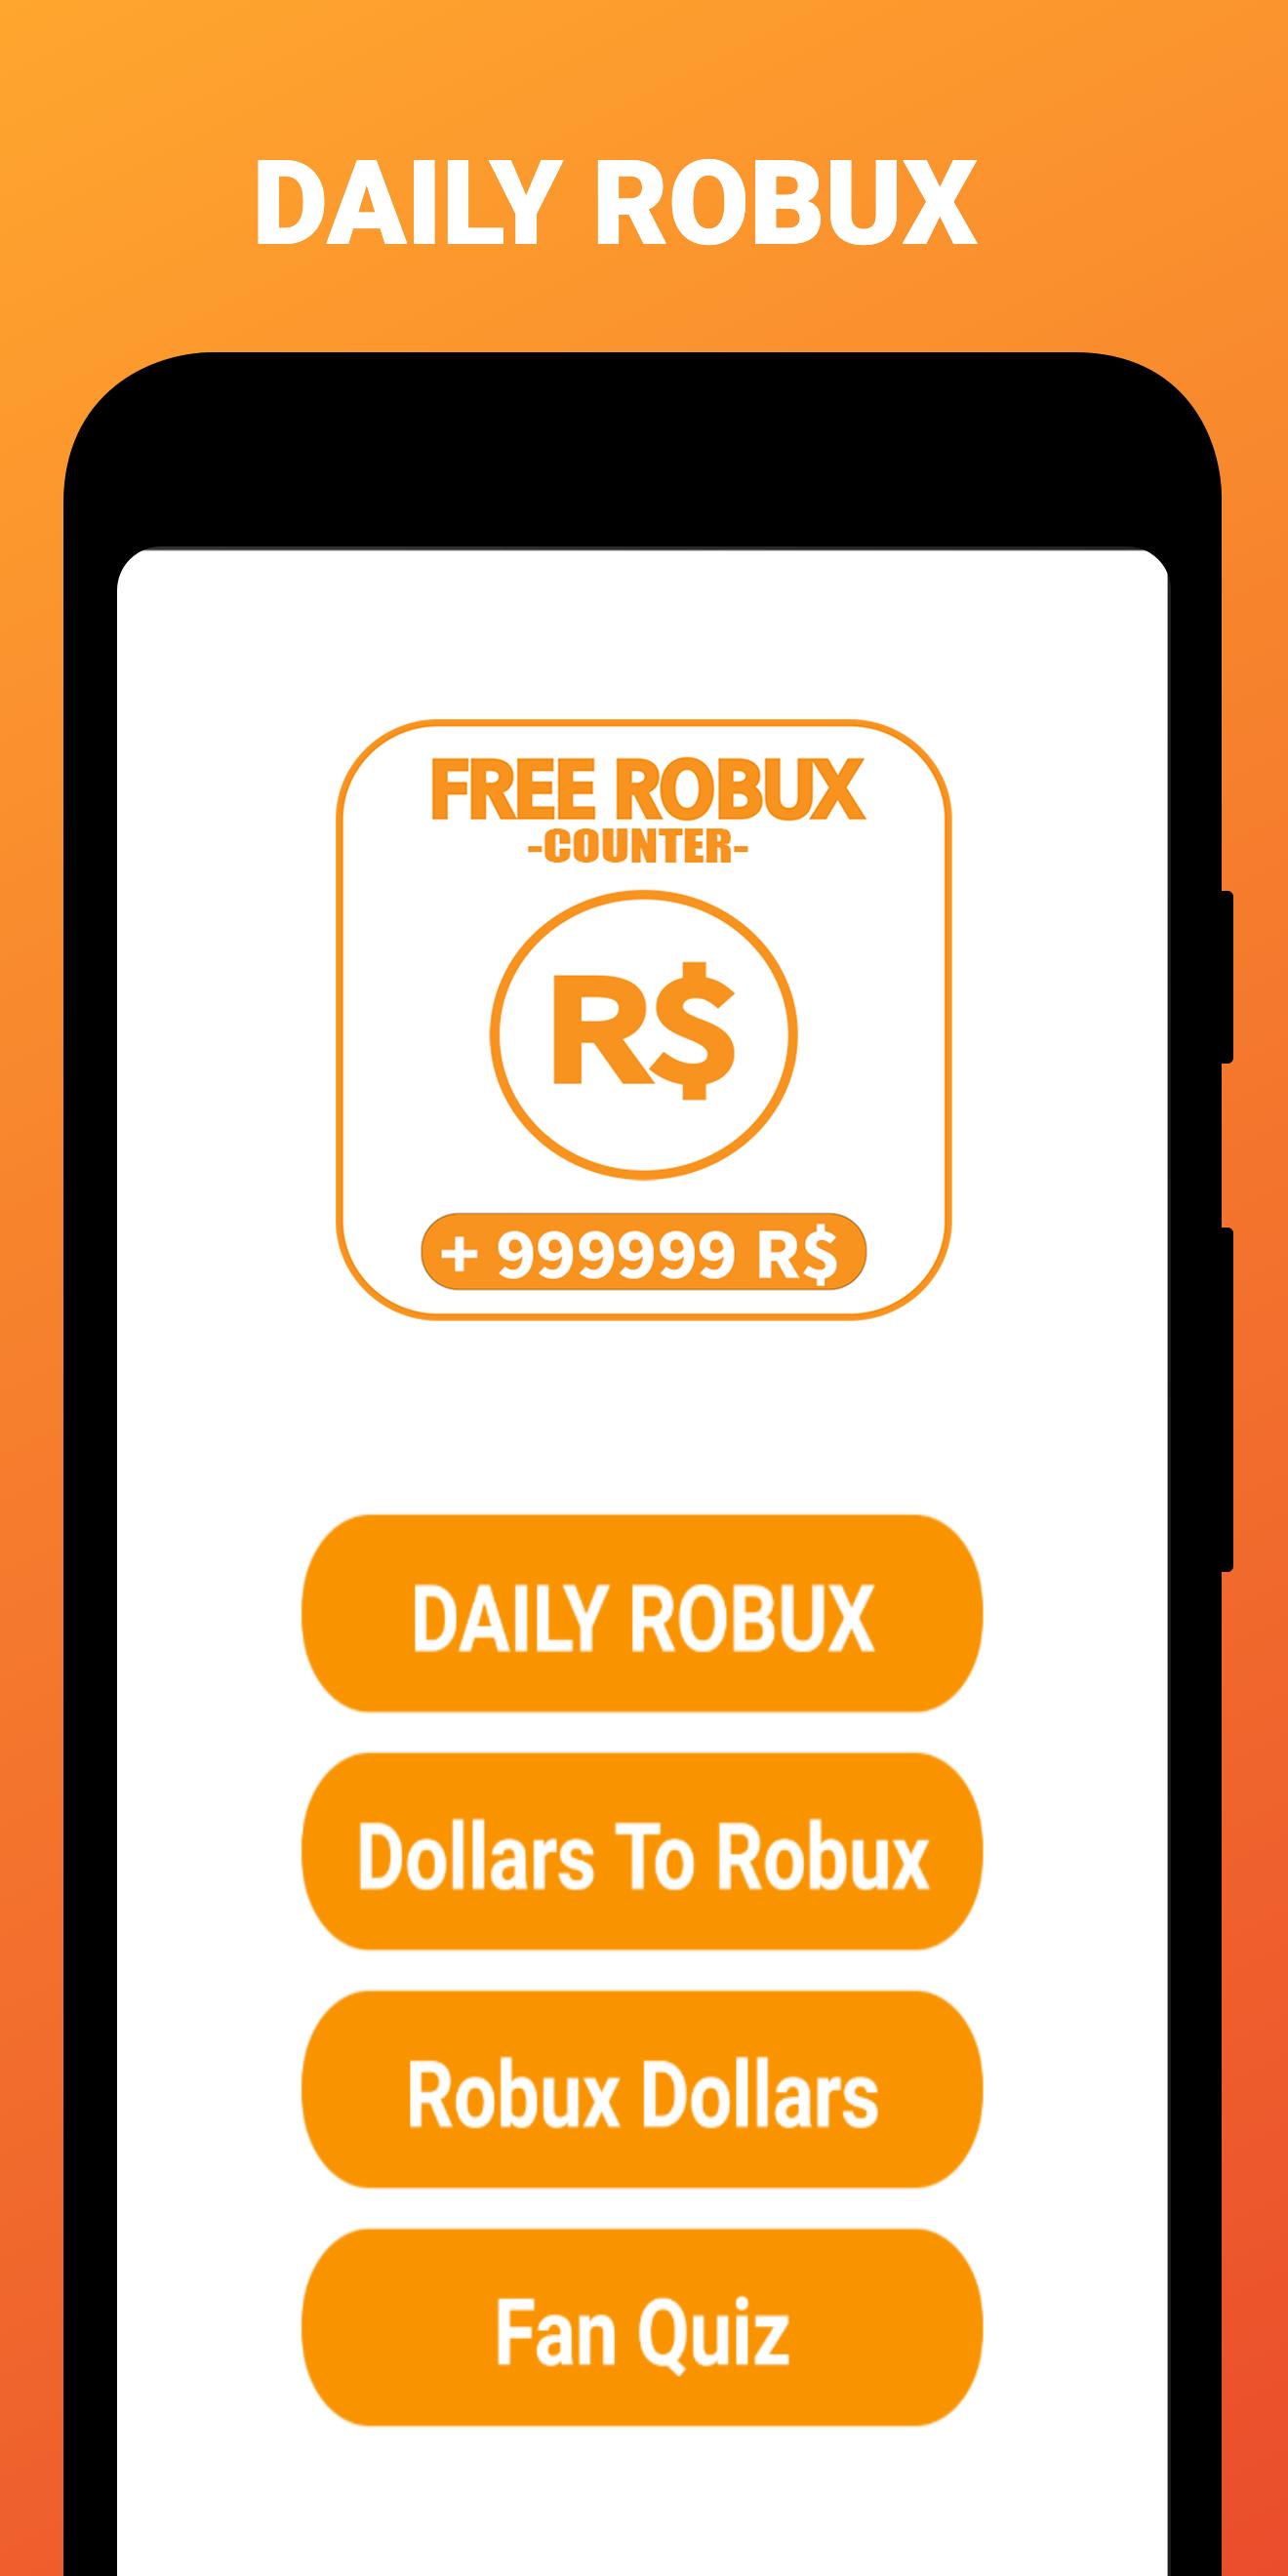 How To Get Free Robux Daily Counter For Android Apk Download - how to get robux daily